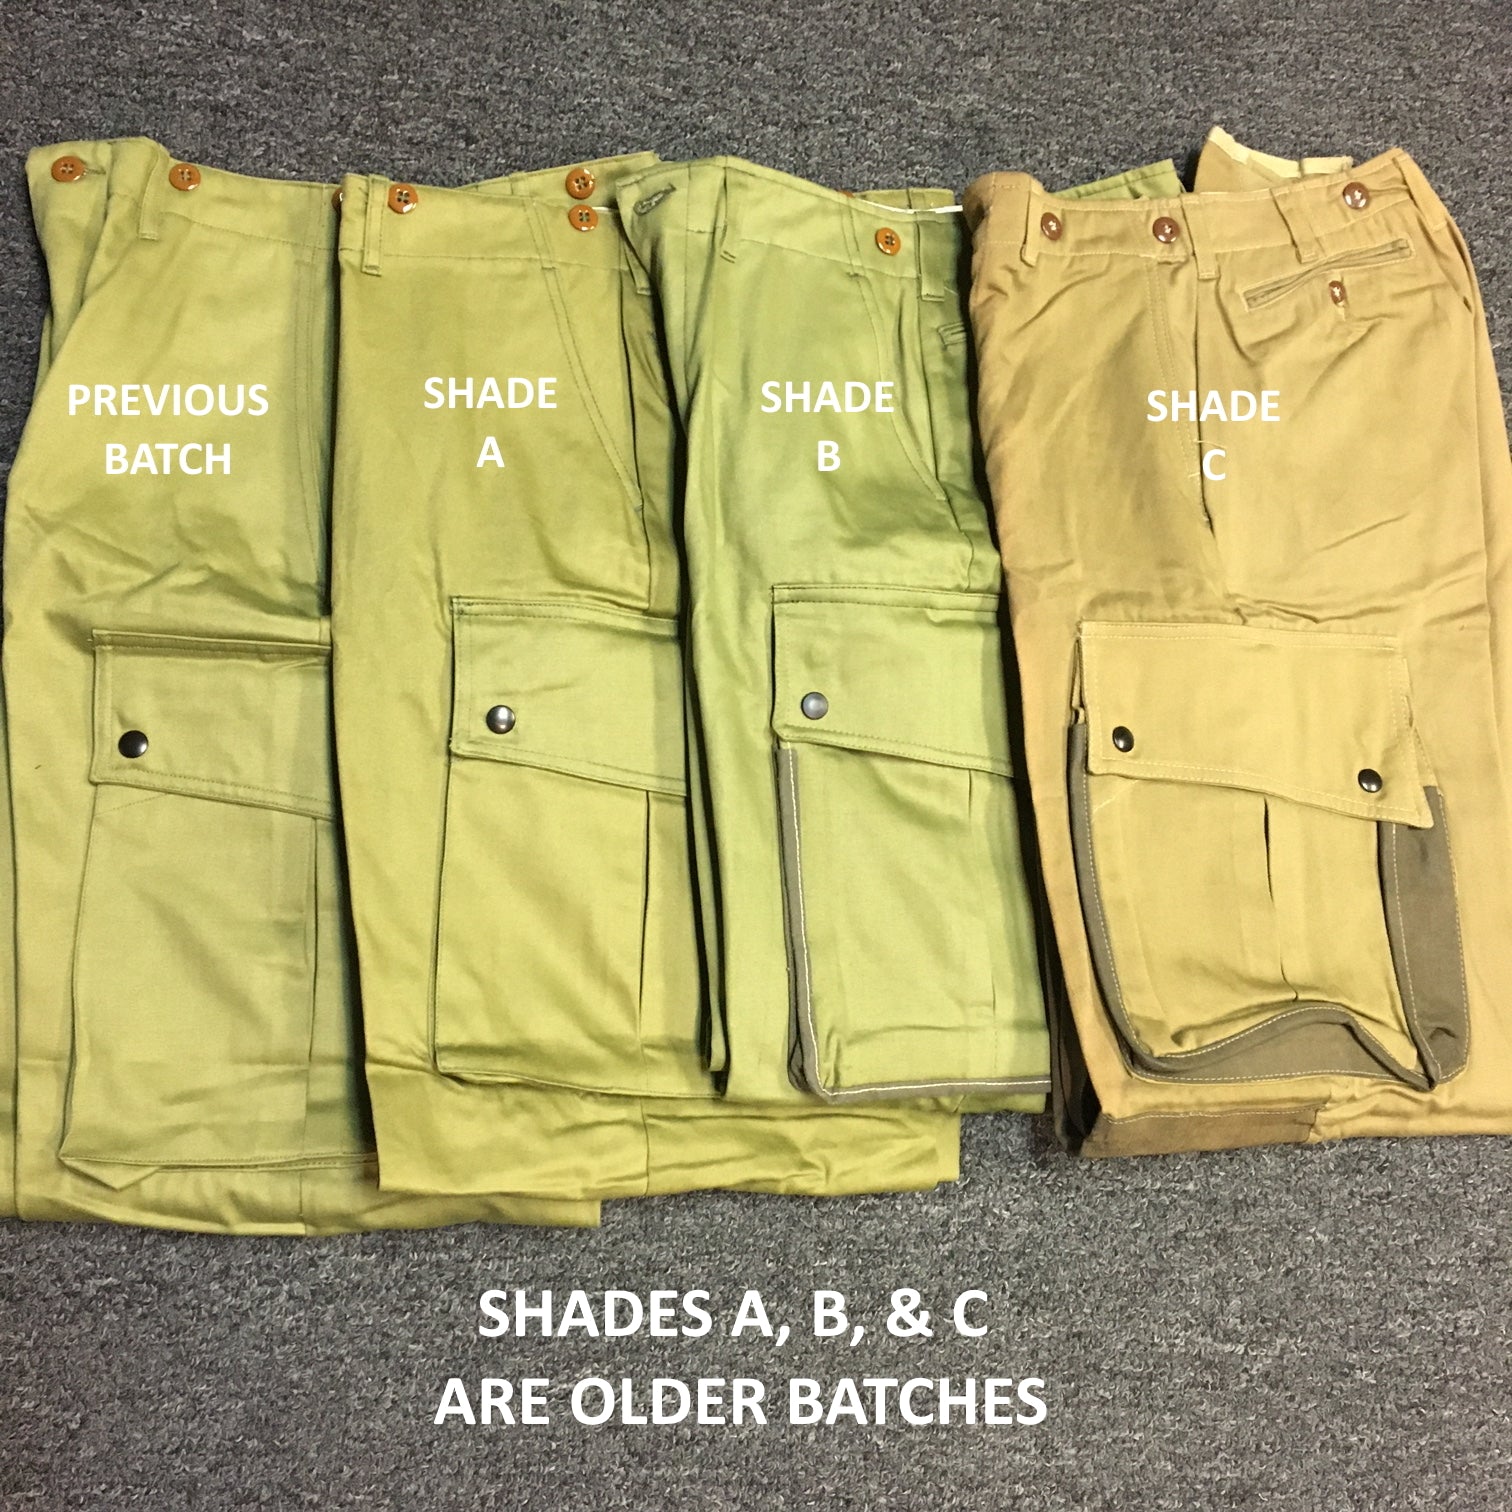 Trousers, Jumper, Parachute, "OLDER Batches" CLOSEOUT sold as-is. All sales final.